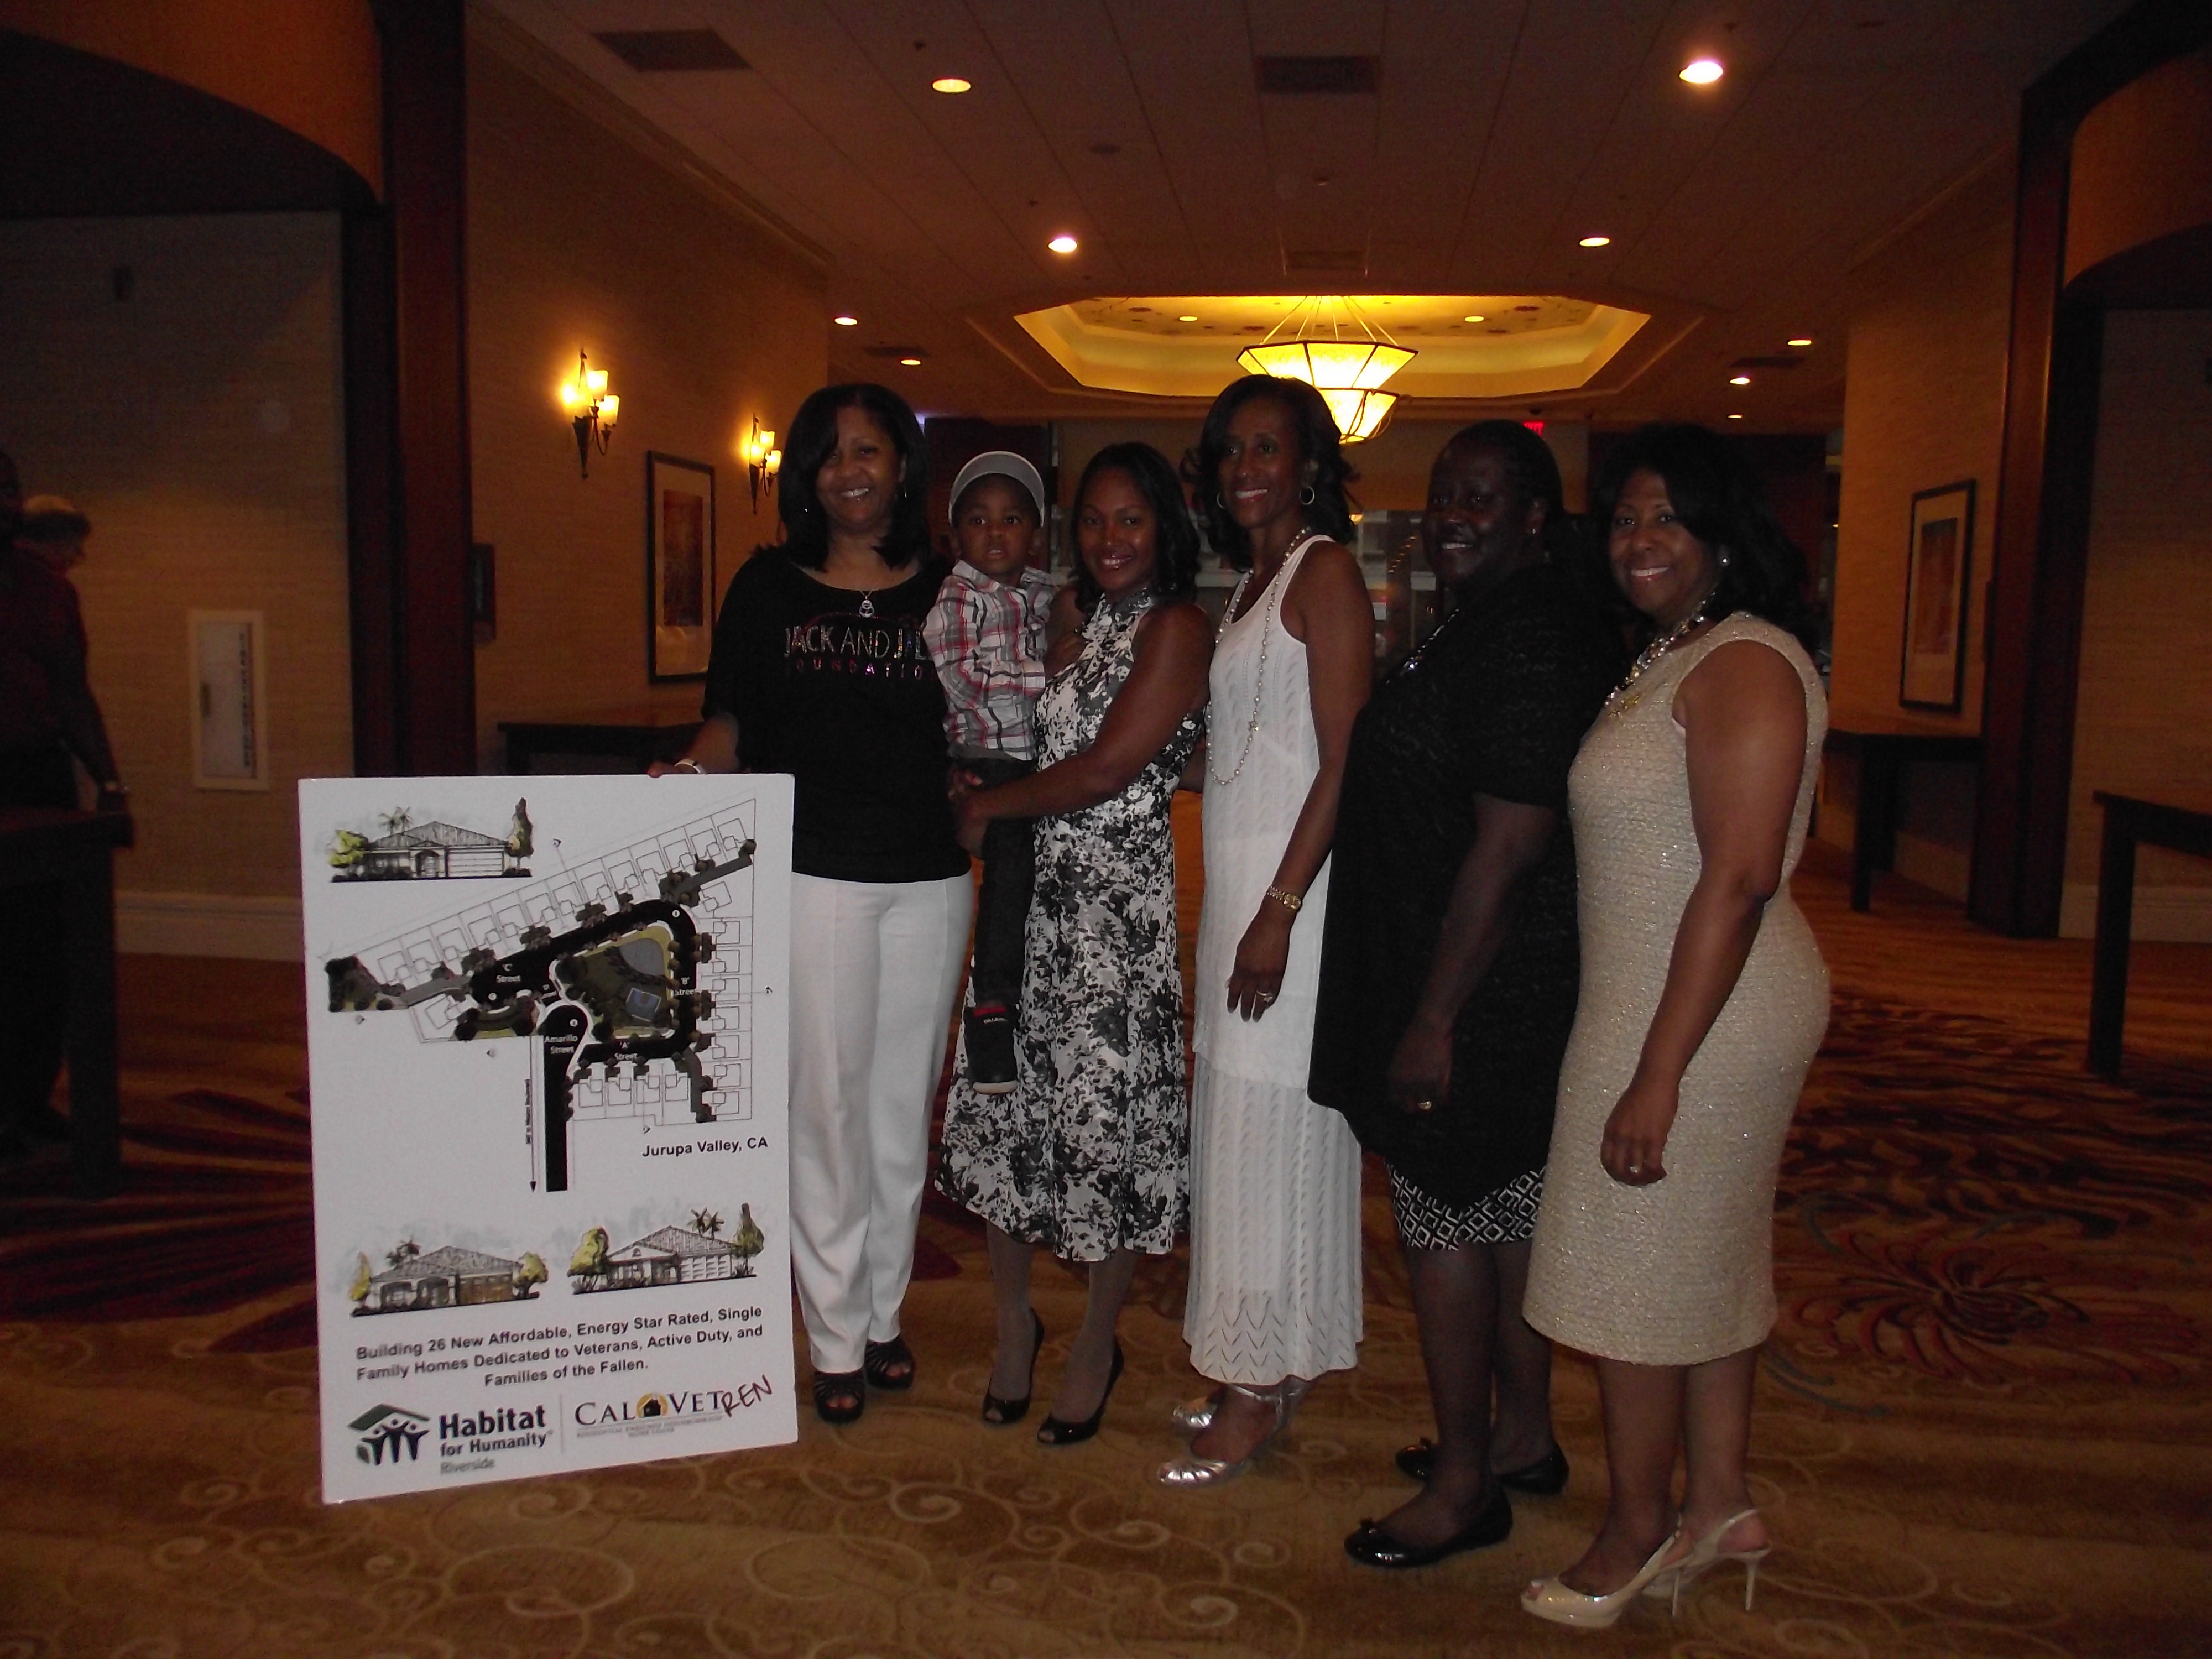 Hicks family with Jack and Jill of America, Inc.